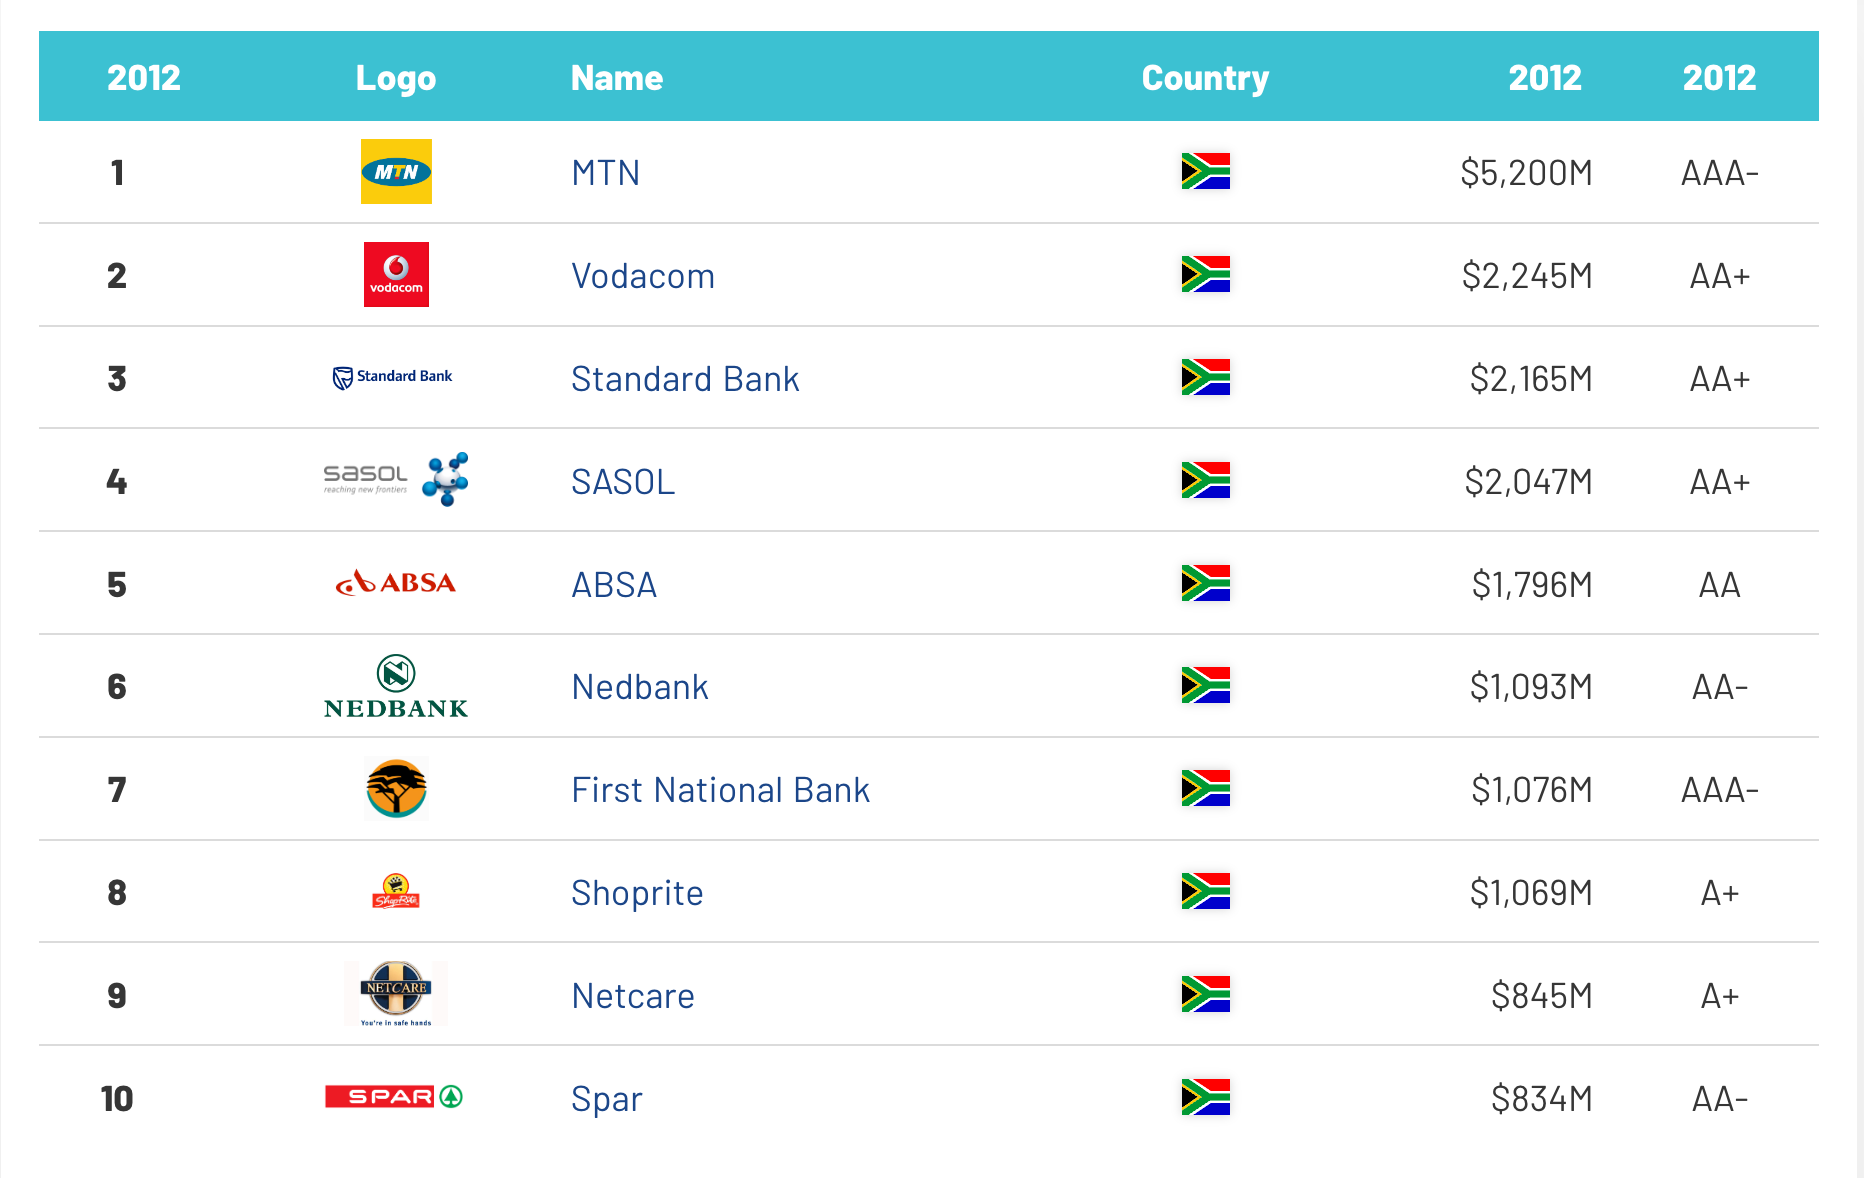 South Africa's biggest brands in 2024